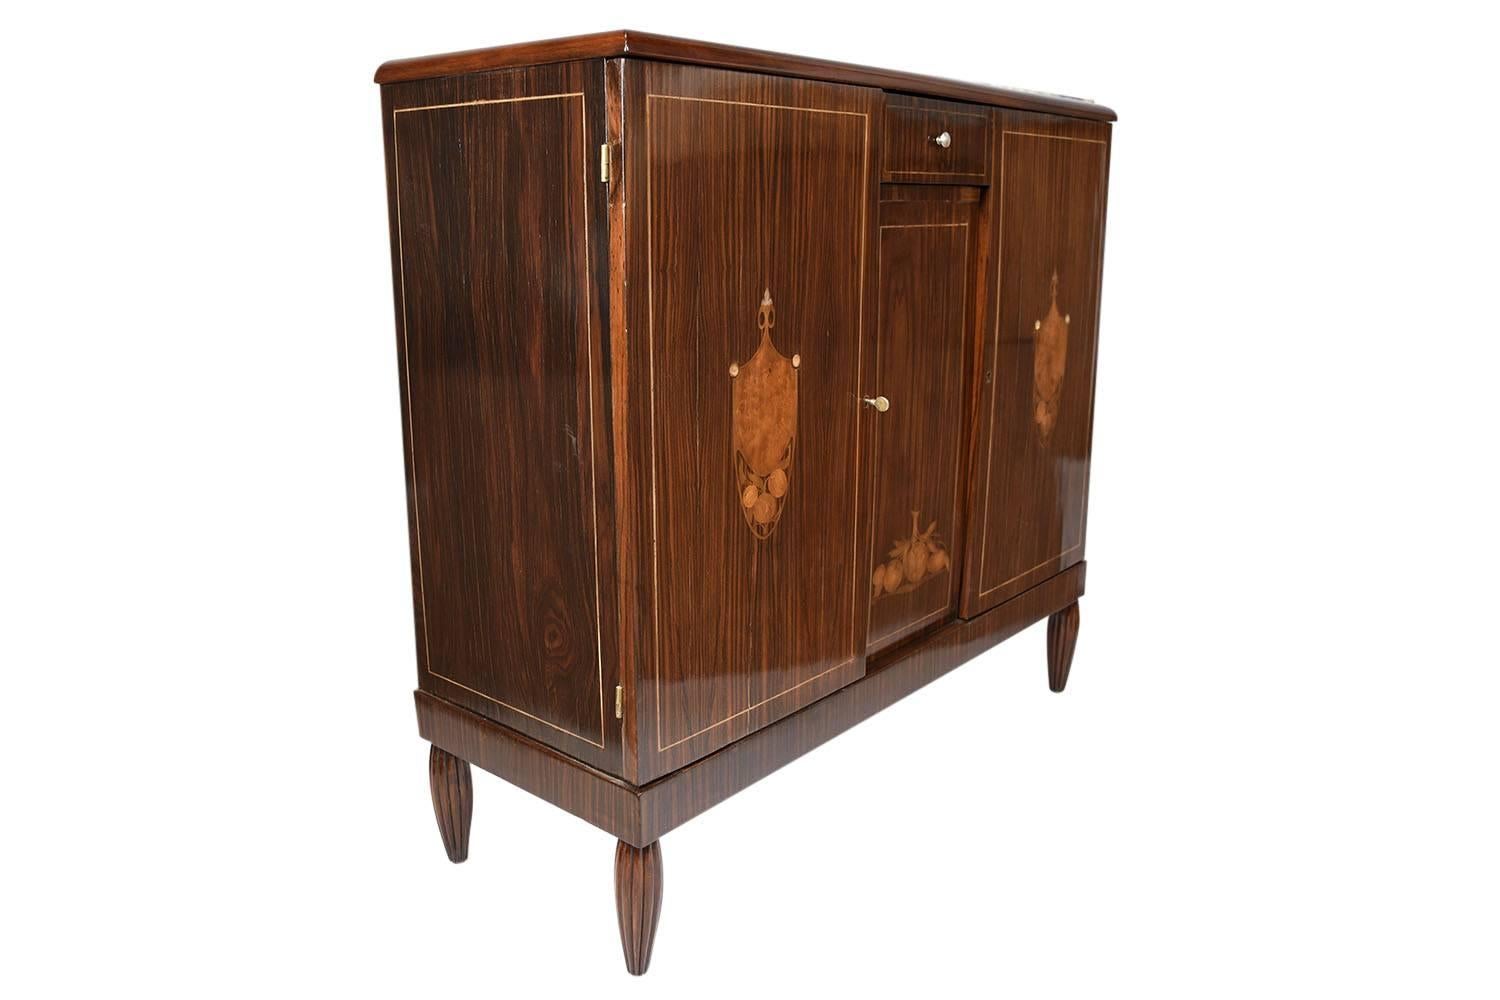 This 1930s Antique French Art Deco-style buffet is made of mahogany wood with beautiful Macassar wood veneers with a lacquered finish. The top features a white marble slab. The facade of the cabinet has inlaid details of two crests with fruit